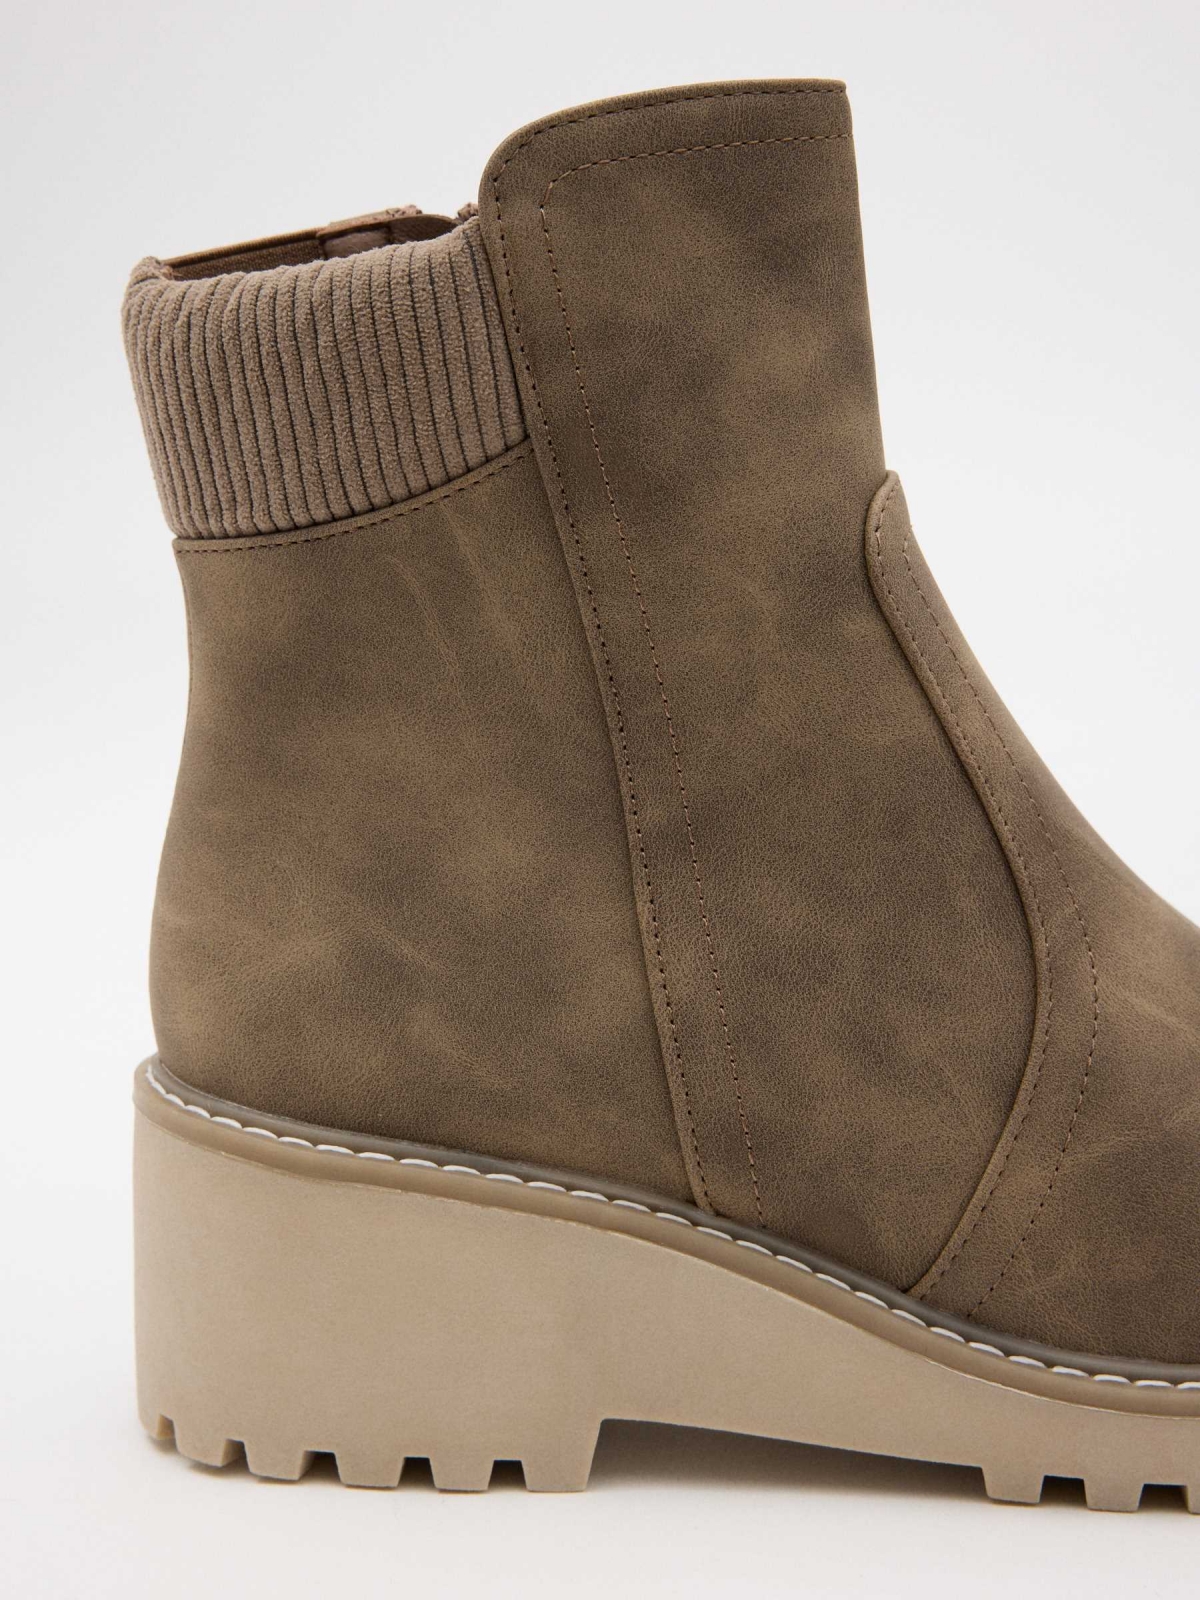 Combined wedge ankle boots brown detail view